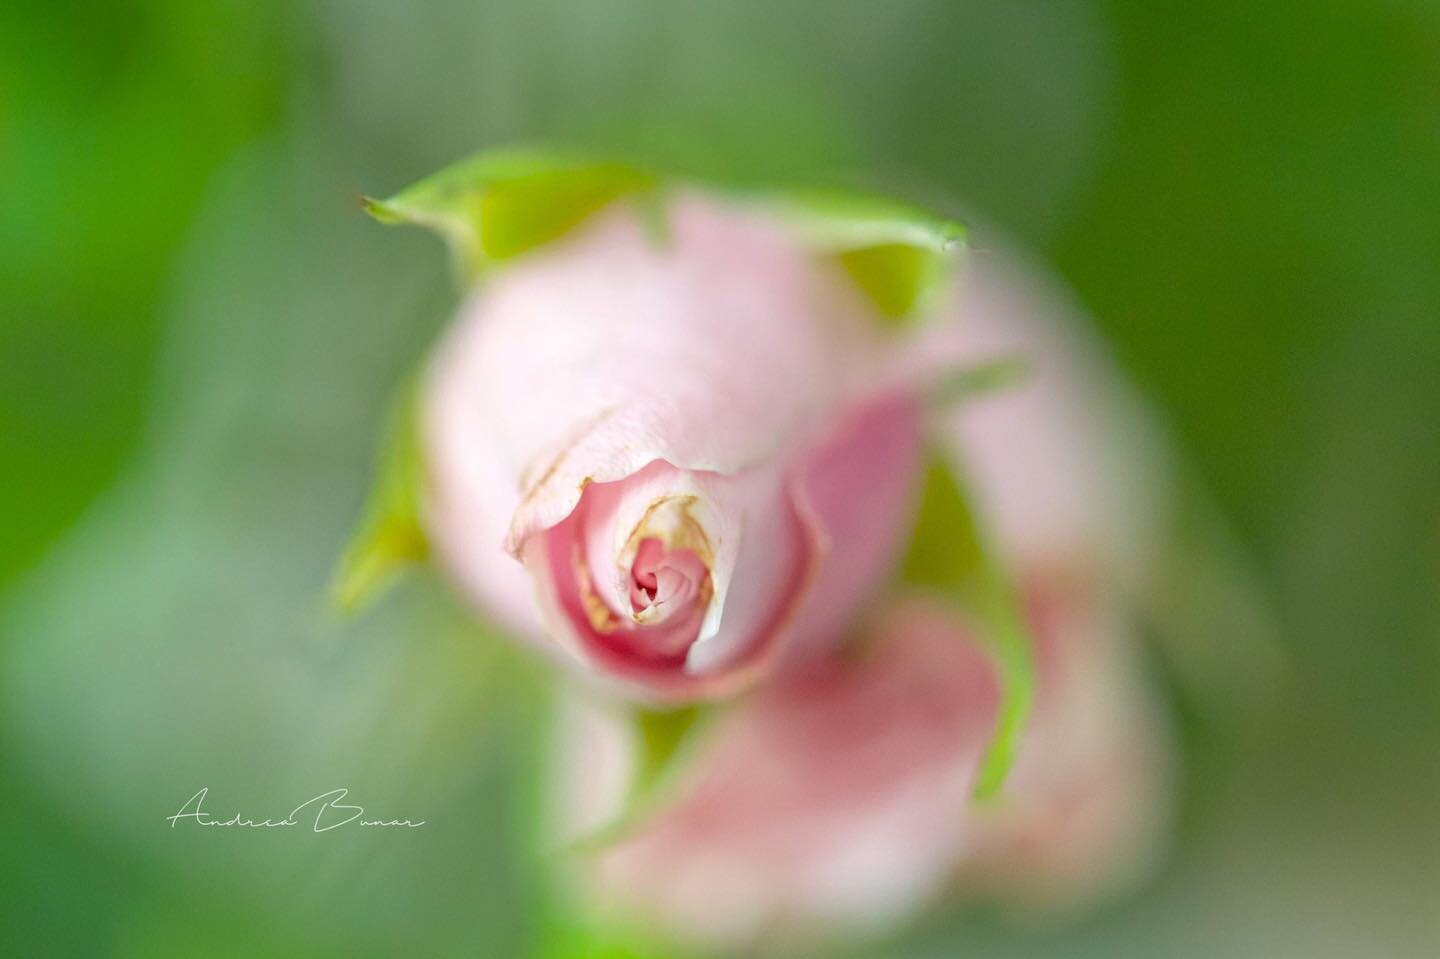 &ldquo;It's always the small pieces that make the
big picture.&rdquo; ~Unknown

#capecodlife #miniaturerose #miniatureroses #pinkroses #flowerstagram #flowers #floralphotography #sendhappy #canonphotography #bns_macro #bns_flowers #bestoftheusa_flowe